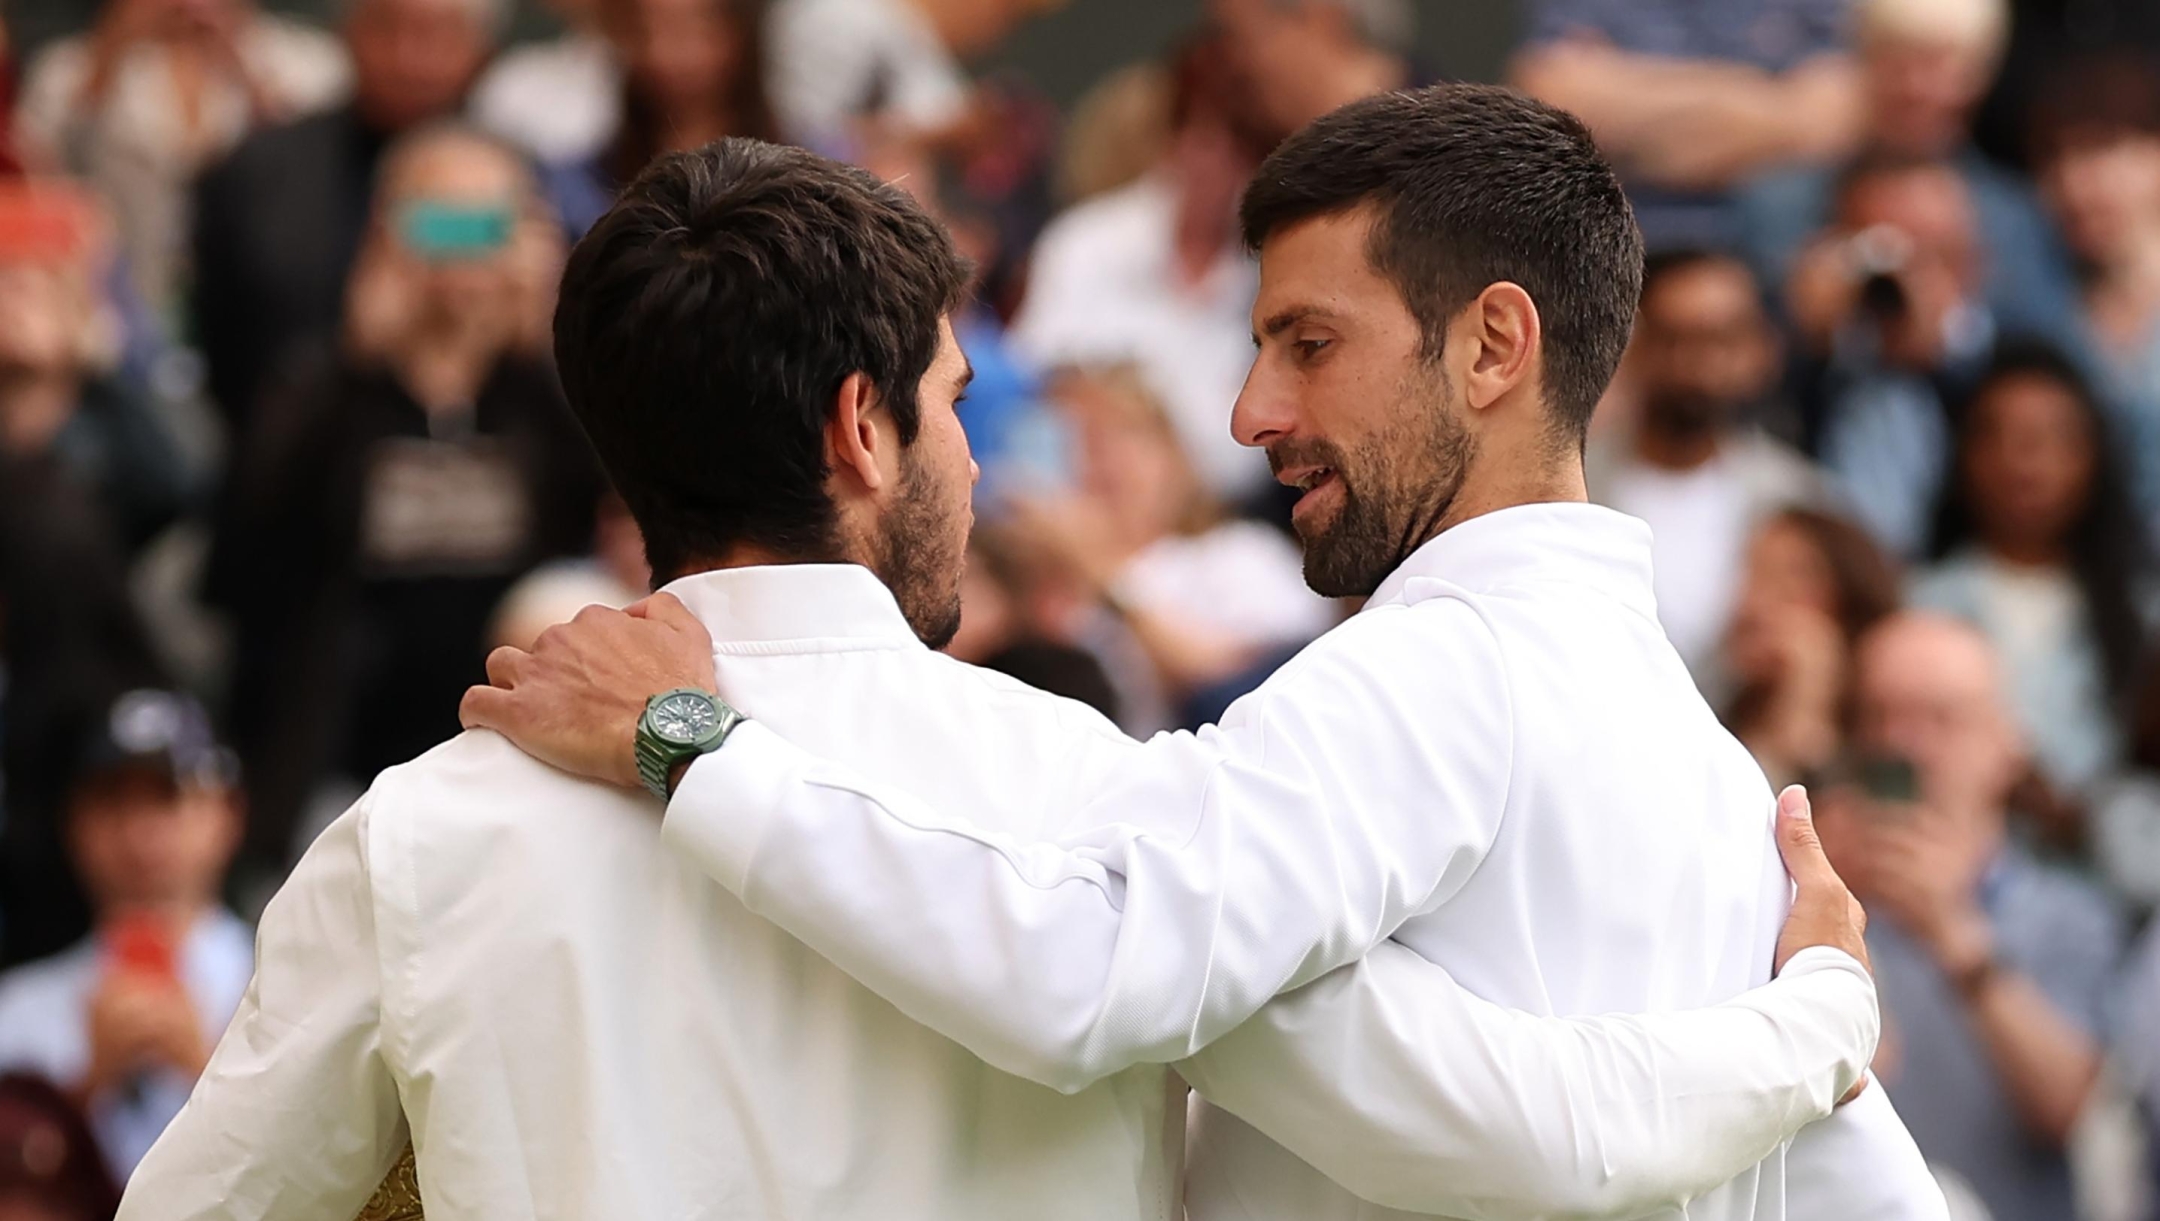 LONDON, ENGLAND - JULY 16: Carlos Alcaraz of Spain is congratulated by Novak Djokovic of Serbia after winning the Men's Singles Final on day fourteen of The Championships Wimbledon 2023 at All England Lawn Tennis and Croquet Club on July 16, 2023 in London, England. (Photo by Julian Finney/Getty Images)